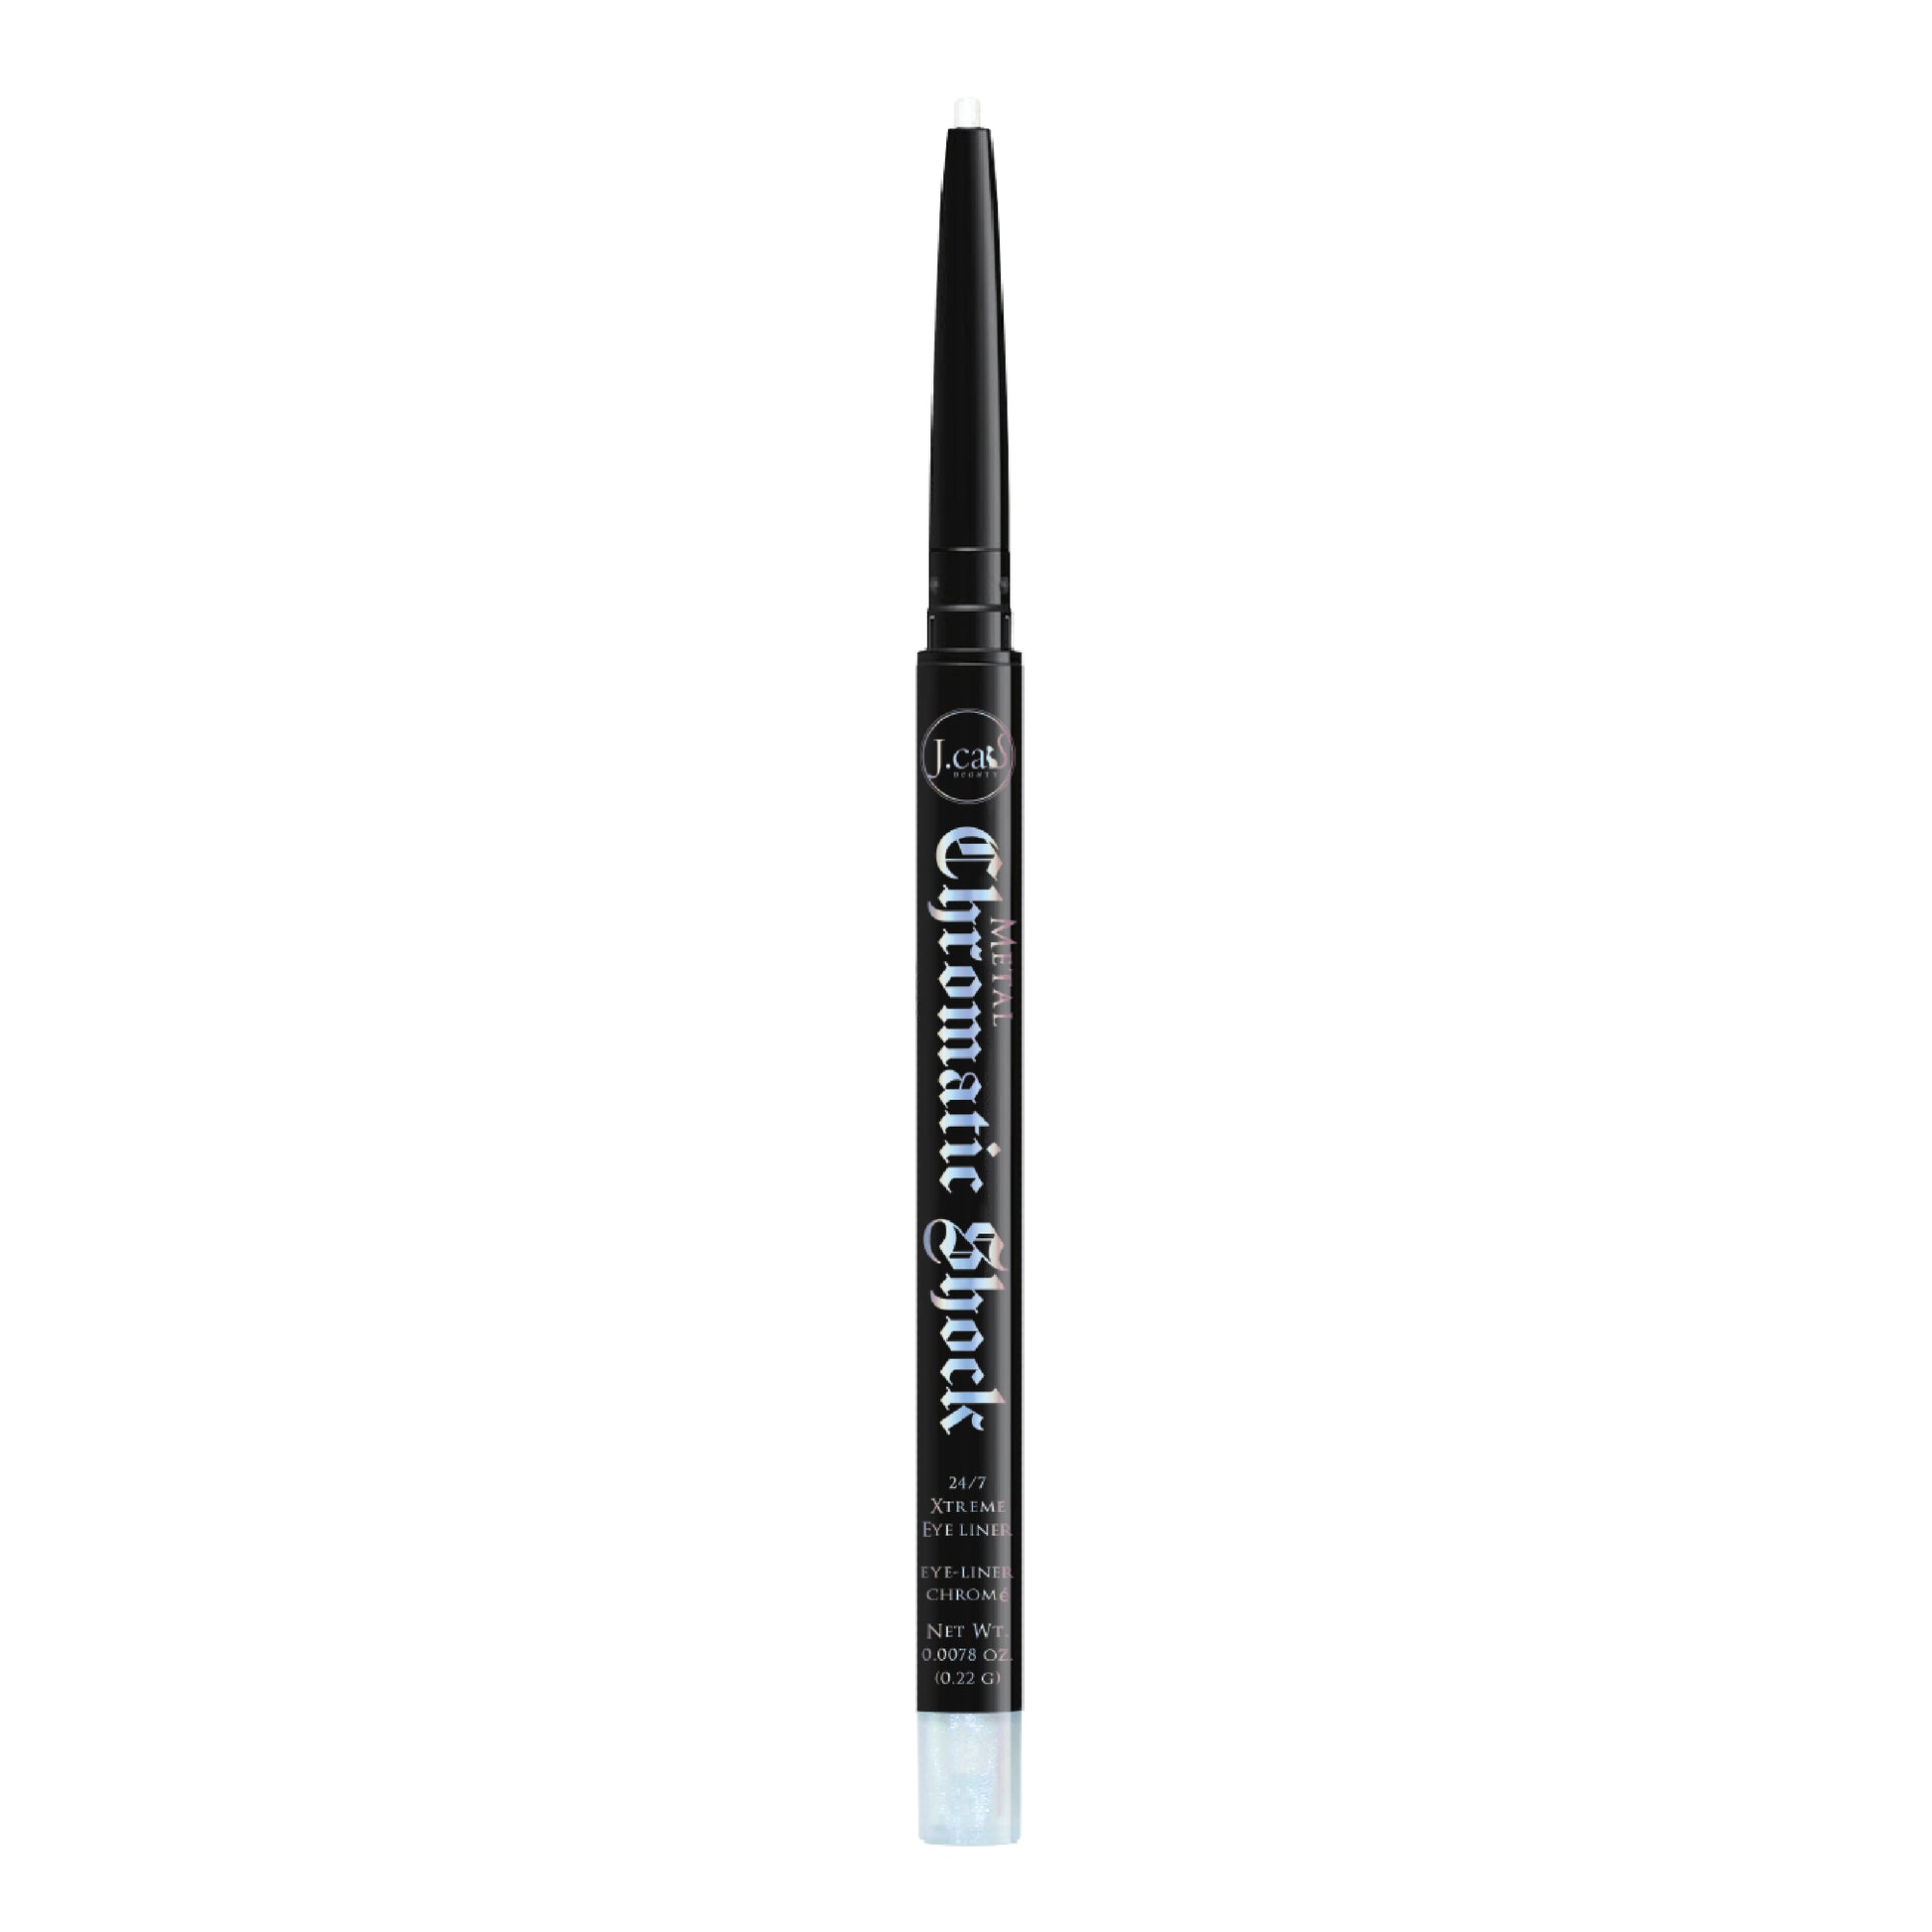 color shifting eyeliner that is long lasting 